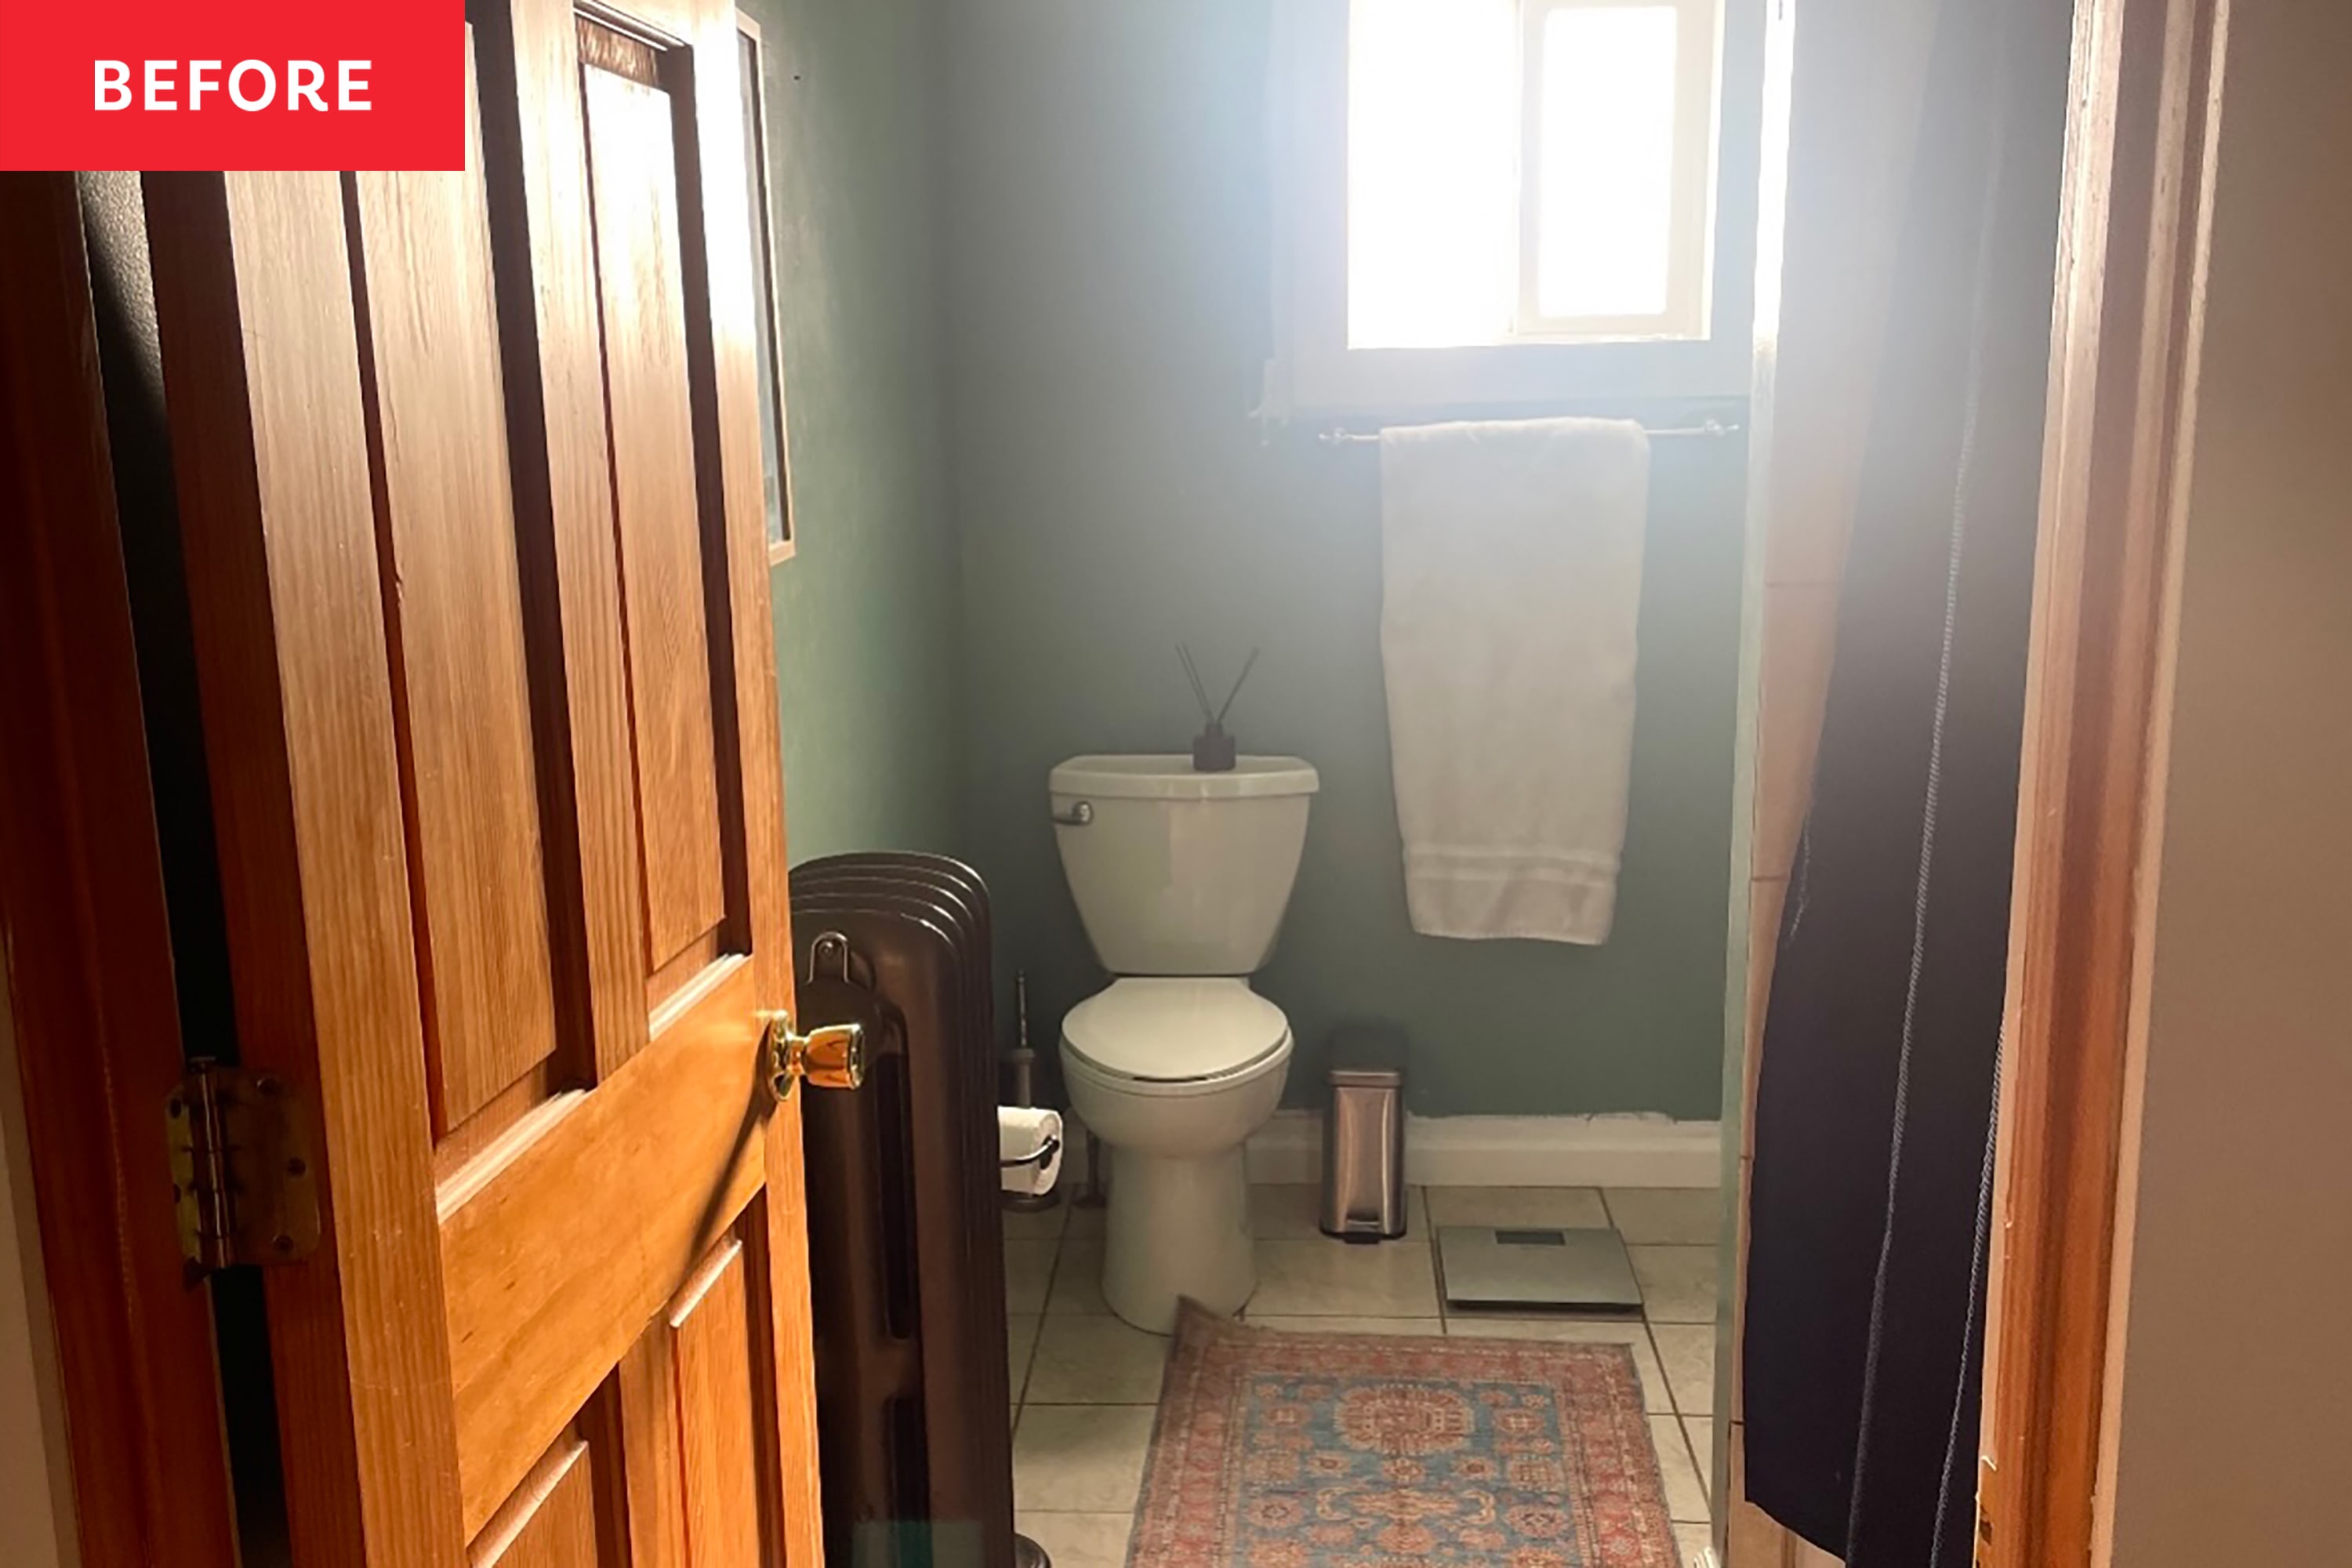 https://cdn.apartmenttherapy.info/image/upload/v1698933235/at/home-projects/2023-11/beth-f/beth-f-bathroom-before-tagged-4.jpg